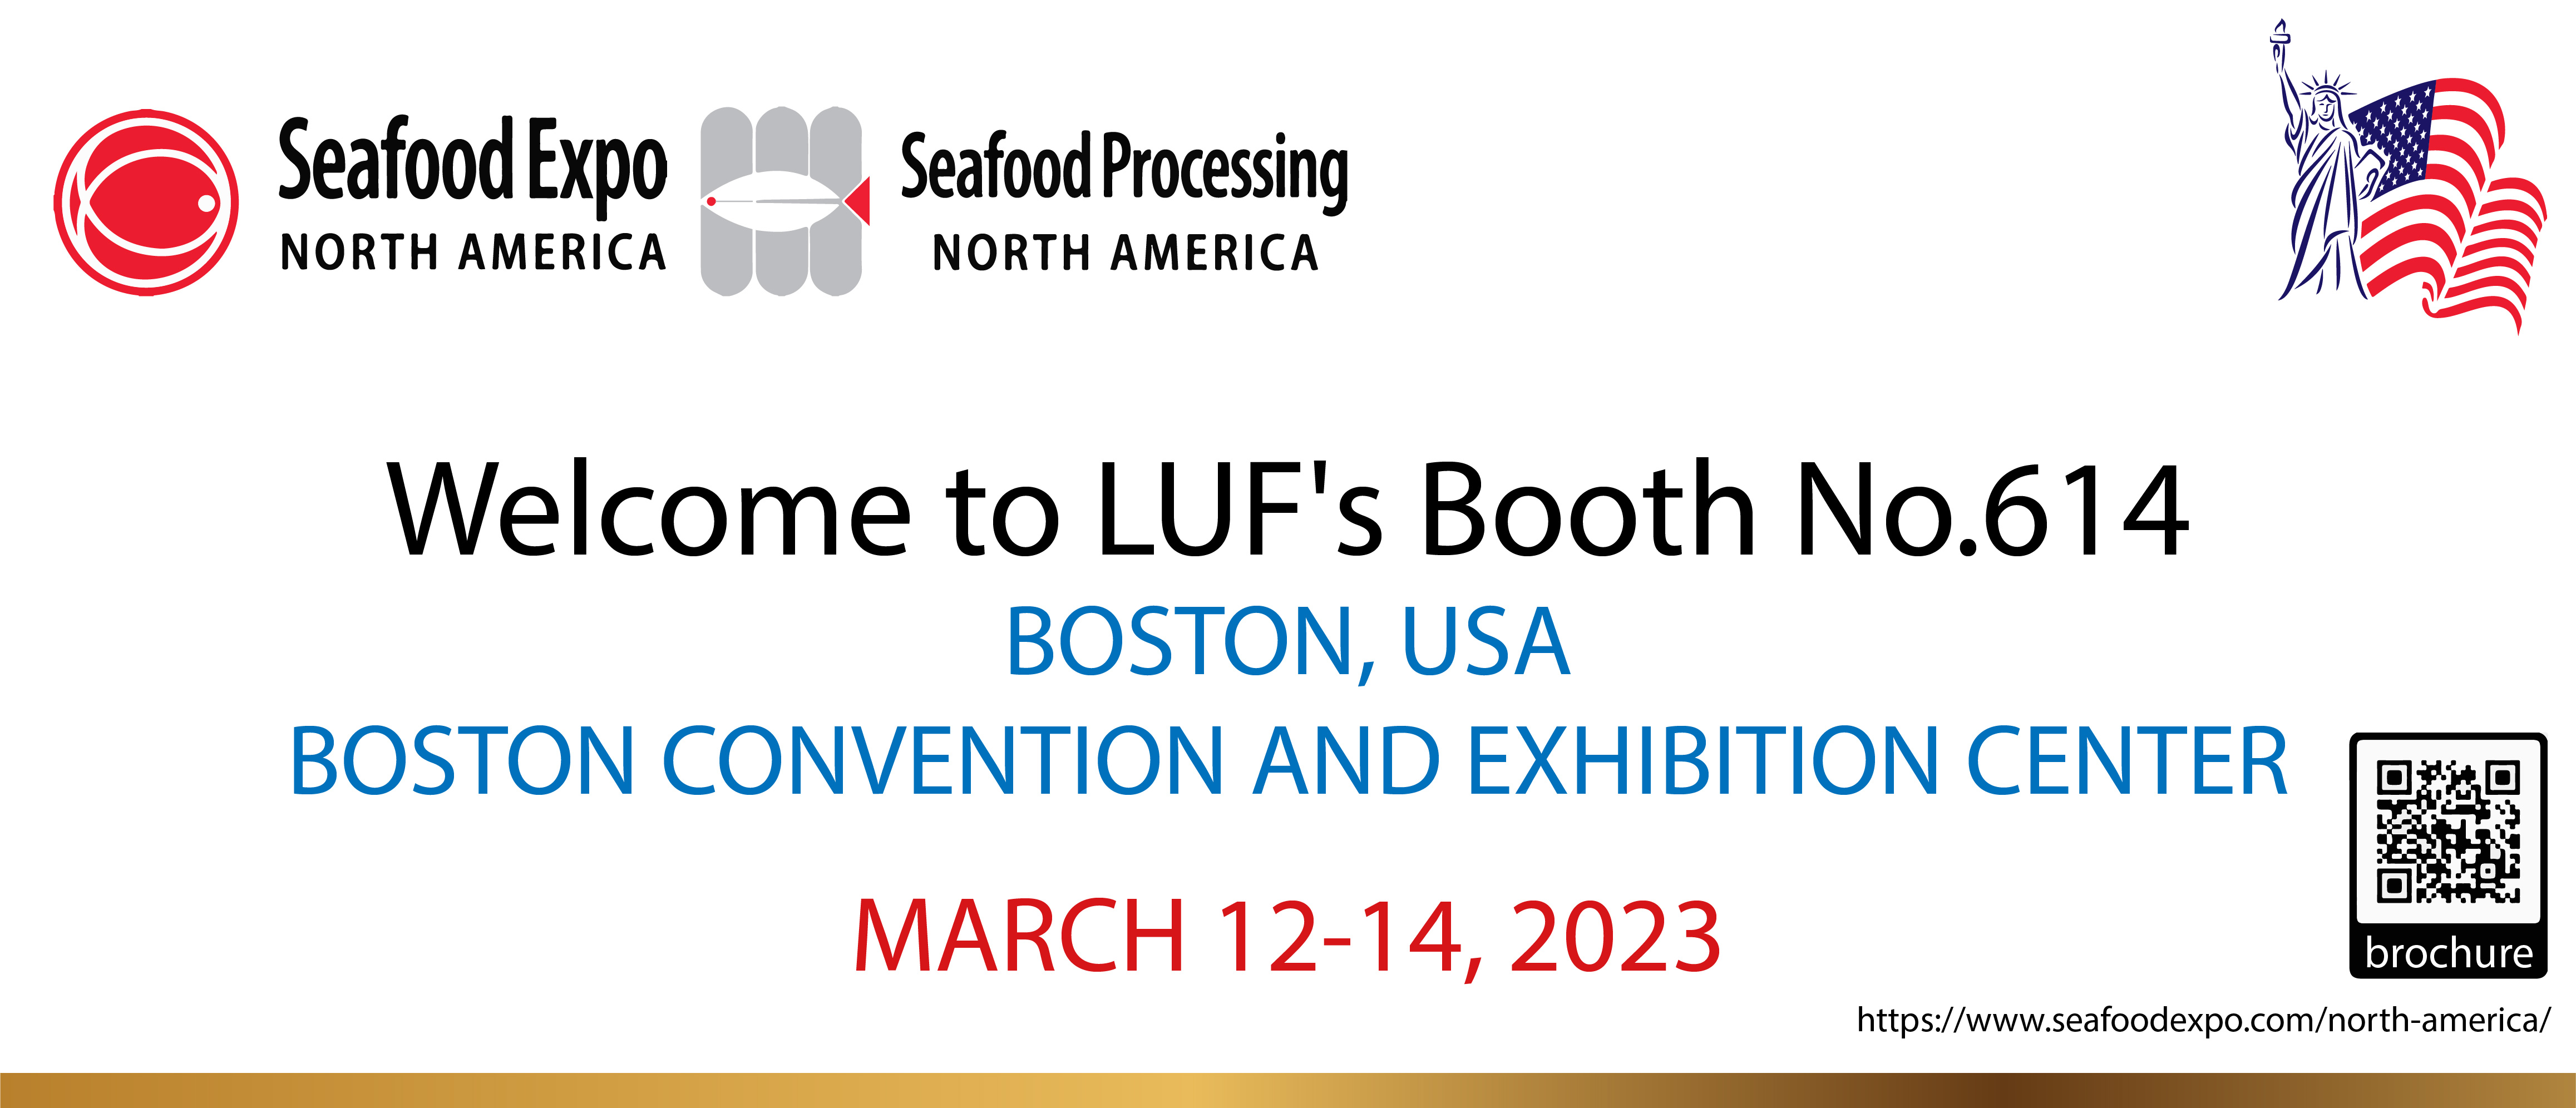 SEAFOOD EXPO NORTH AMERICA : MID MARCH'23 - SEE YOU THERE!